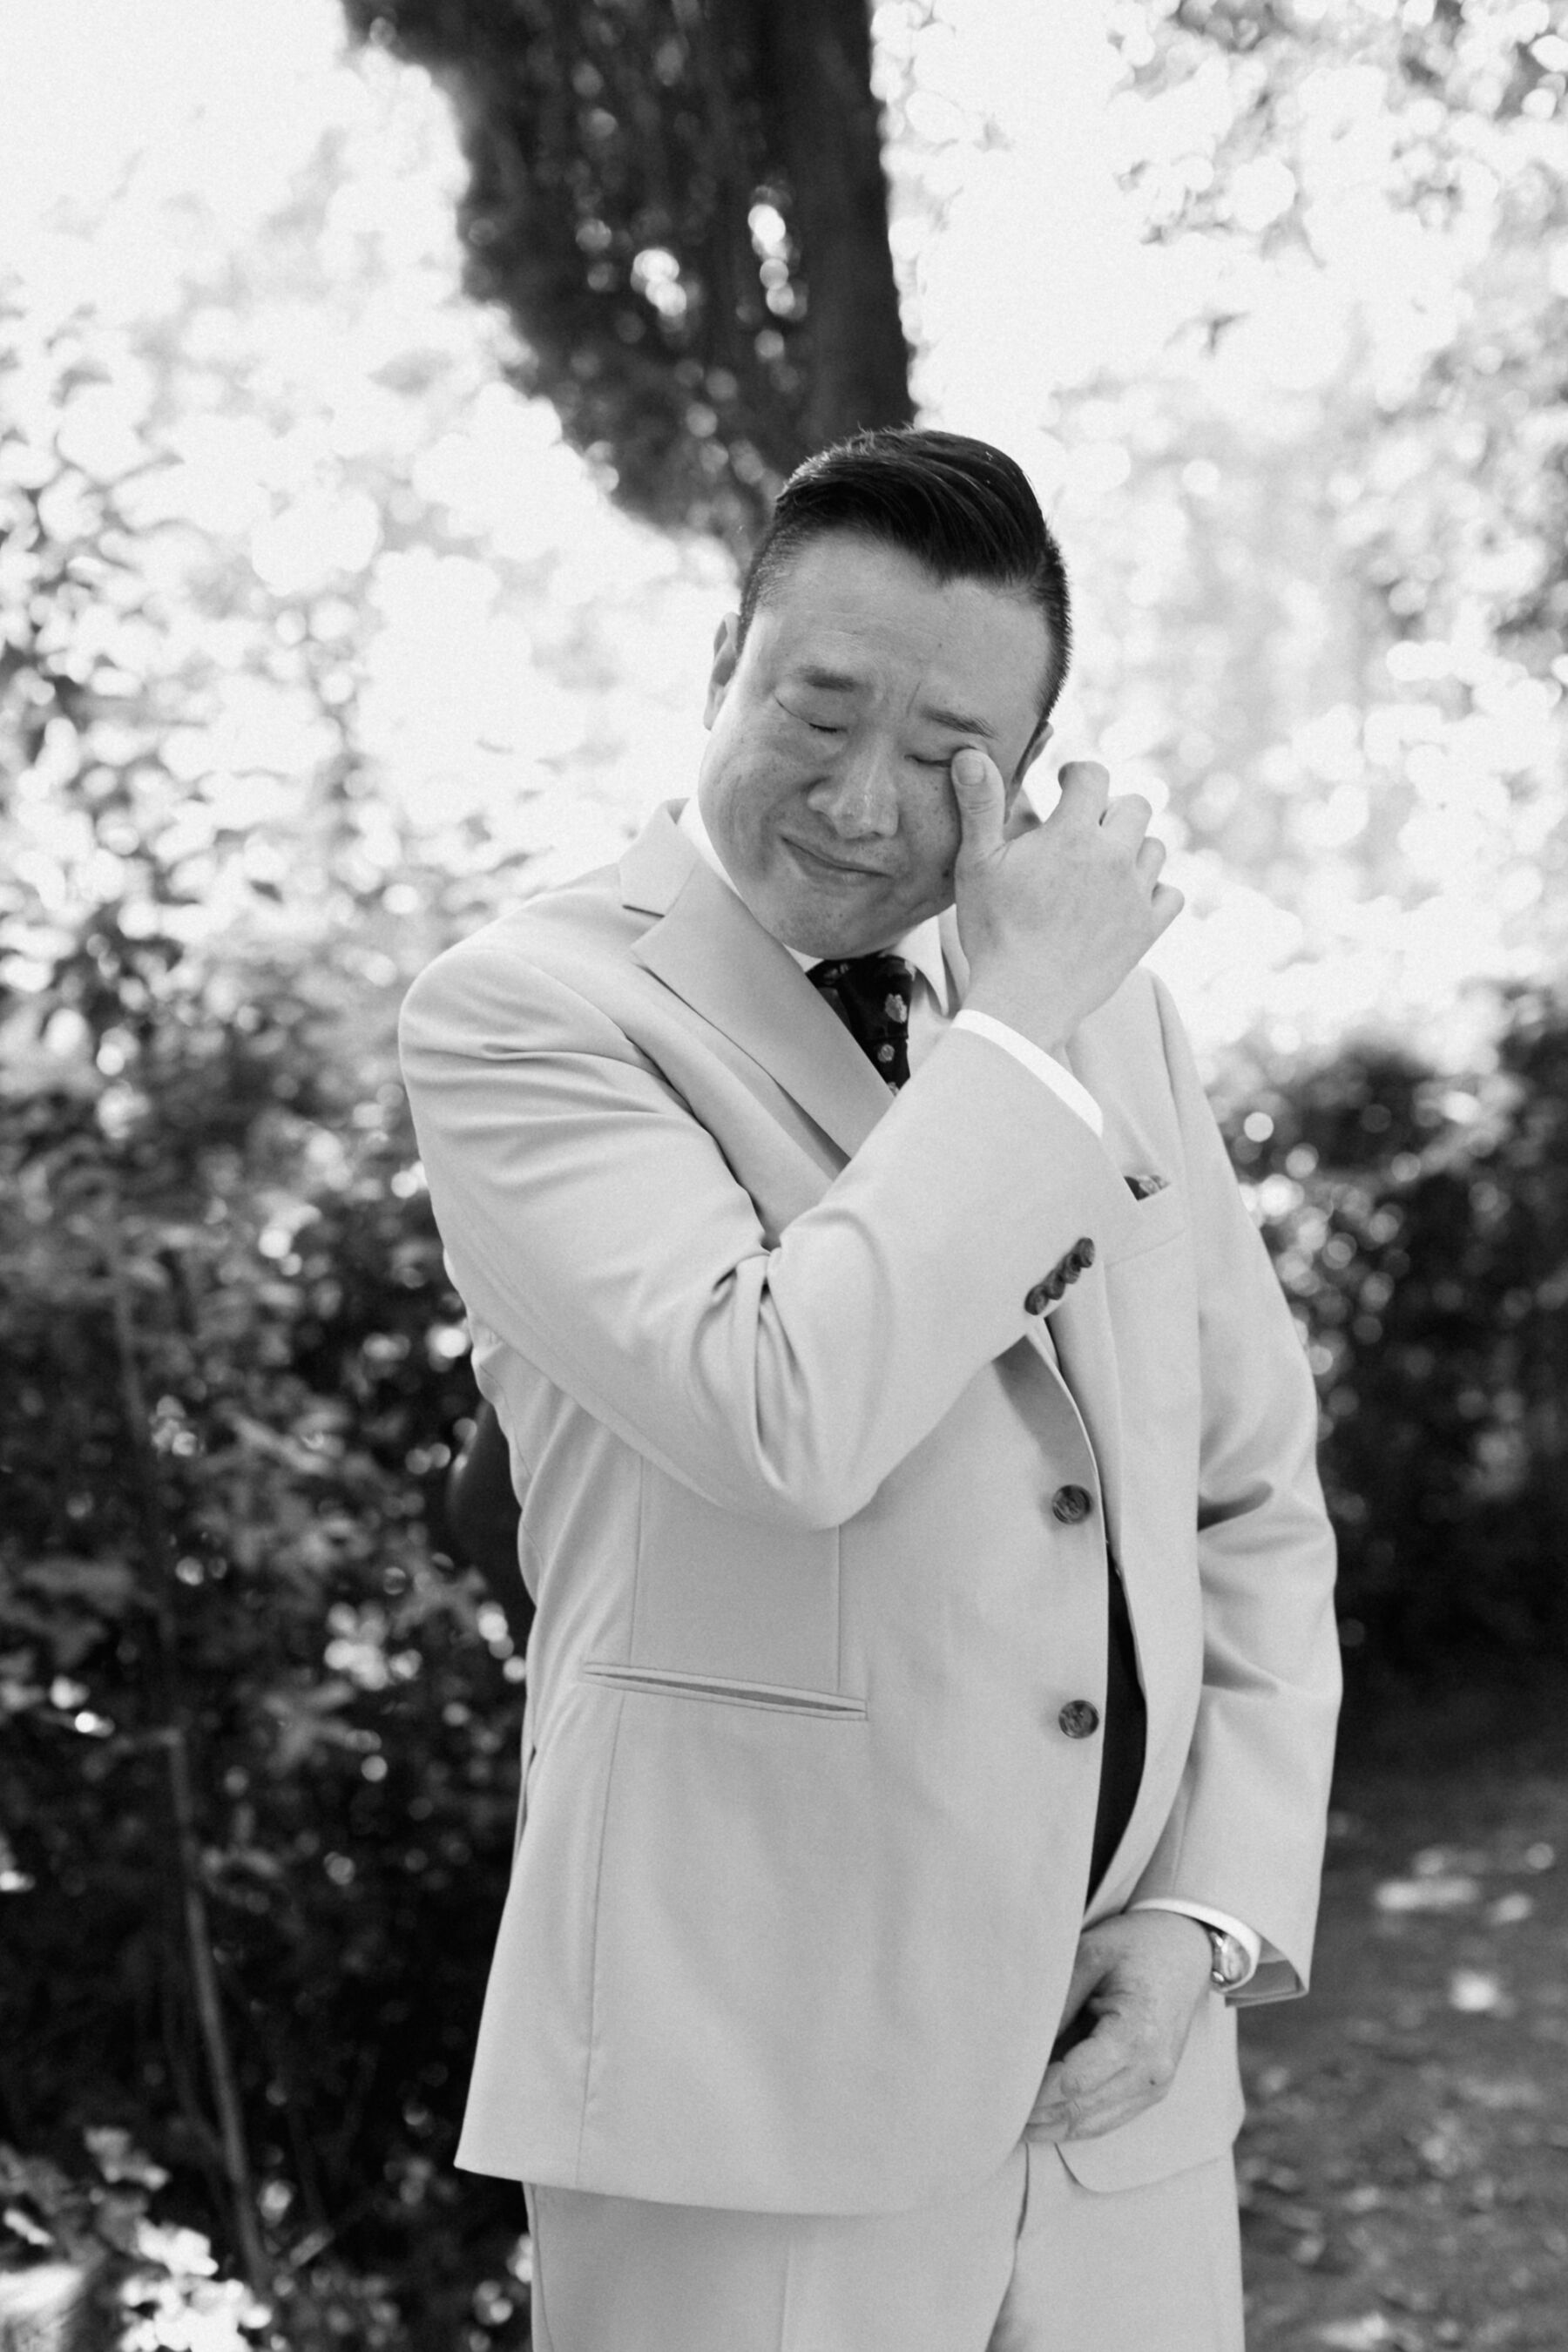 Groom wiping a tear from his eye as he awaits his bride at an outdoor ceremony. Groom wears a pale suit. Zonzo Photography.